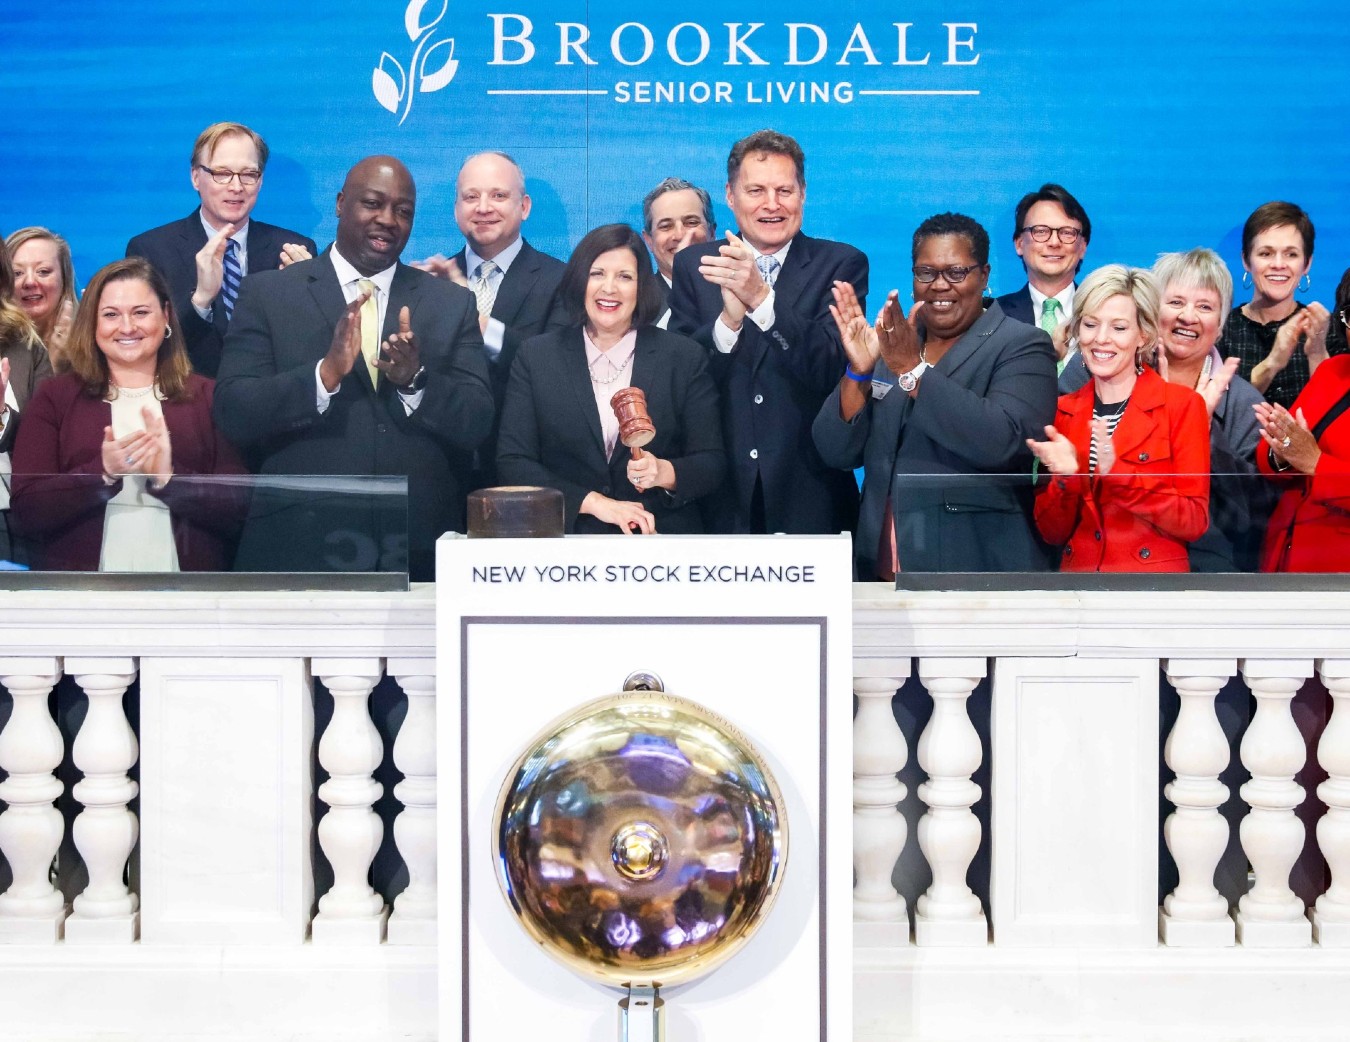 Cindy Baier rings NYSE bell on April 19.